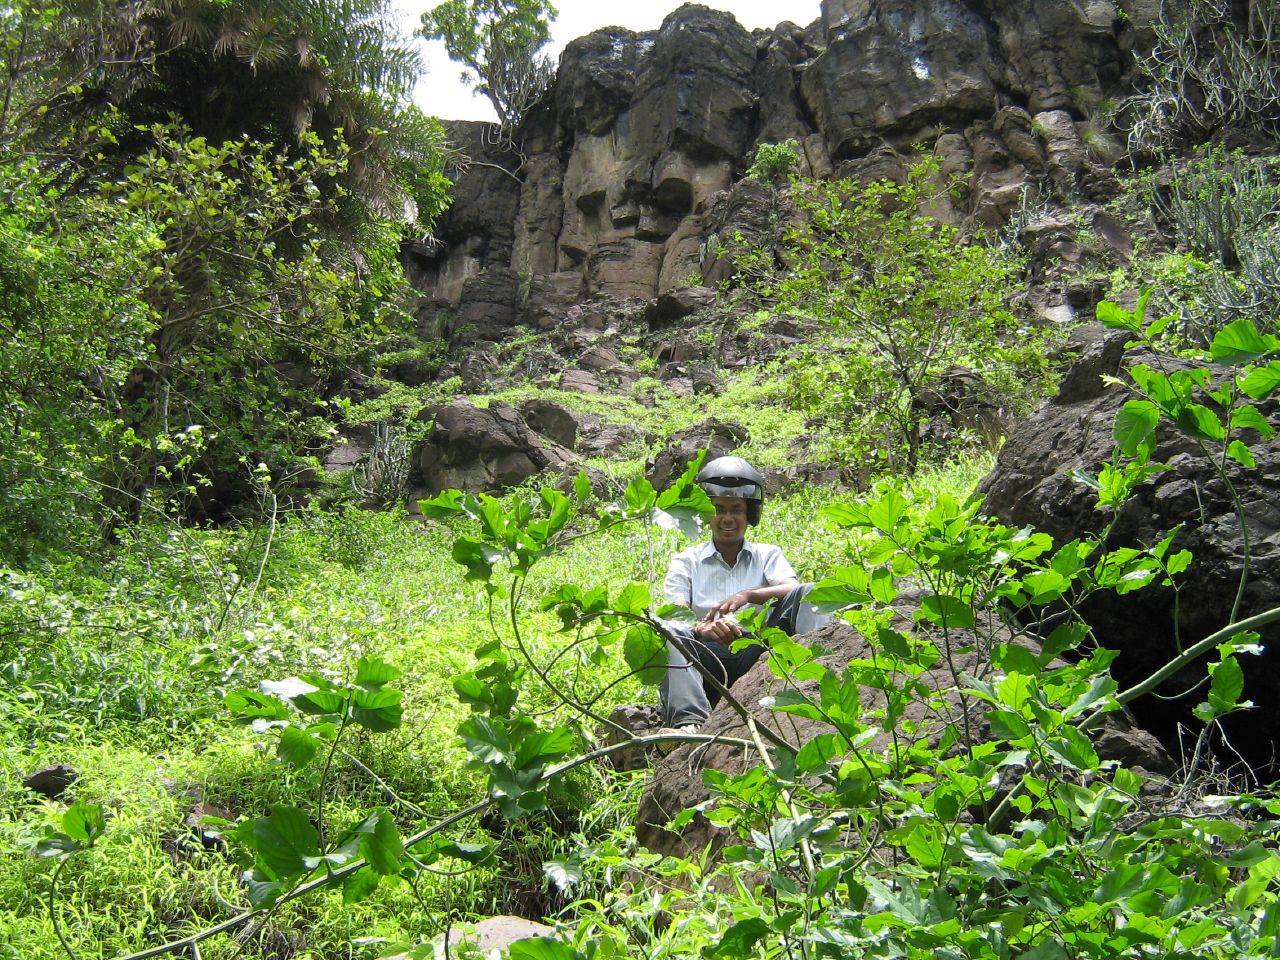 a man stands in a field near the rocks